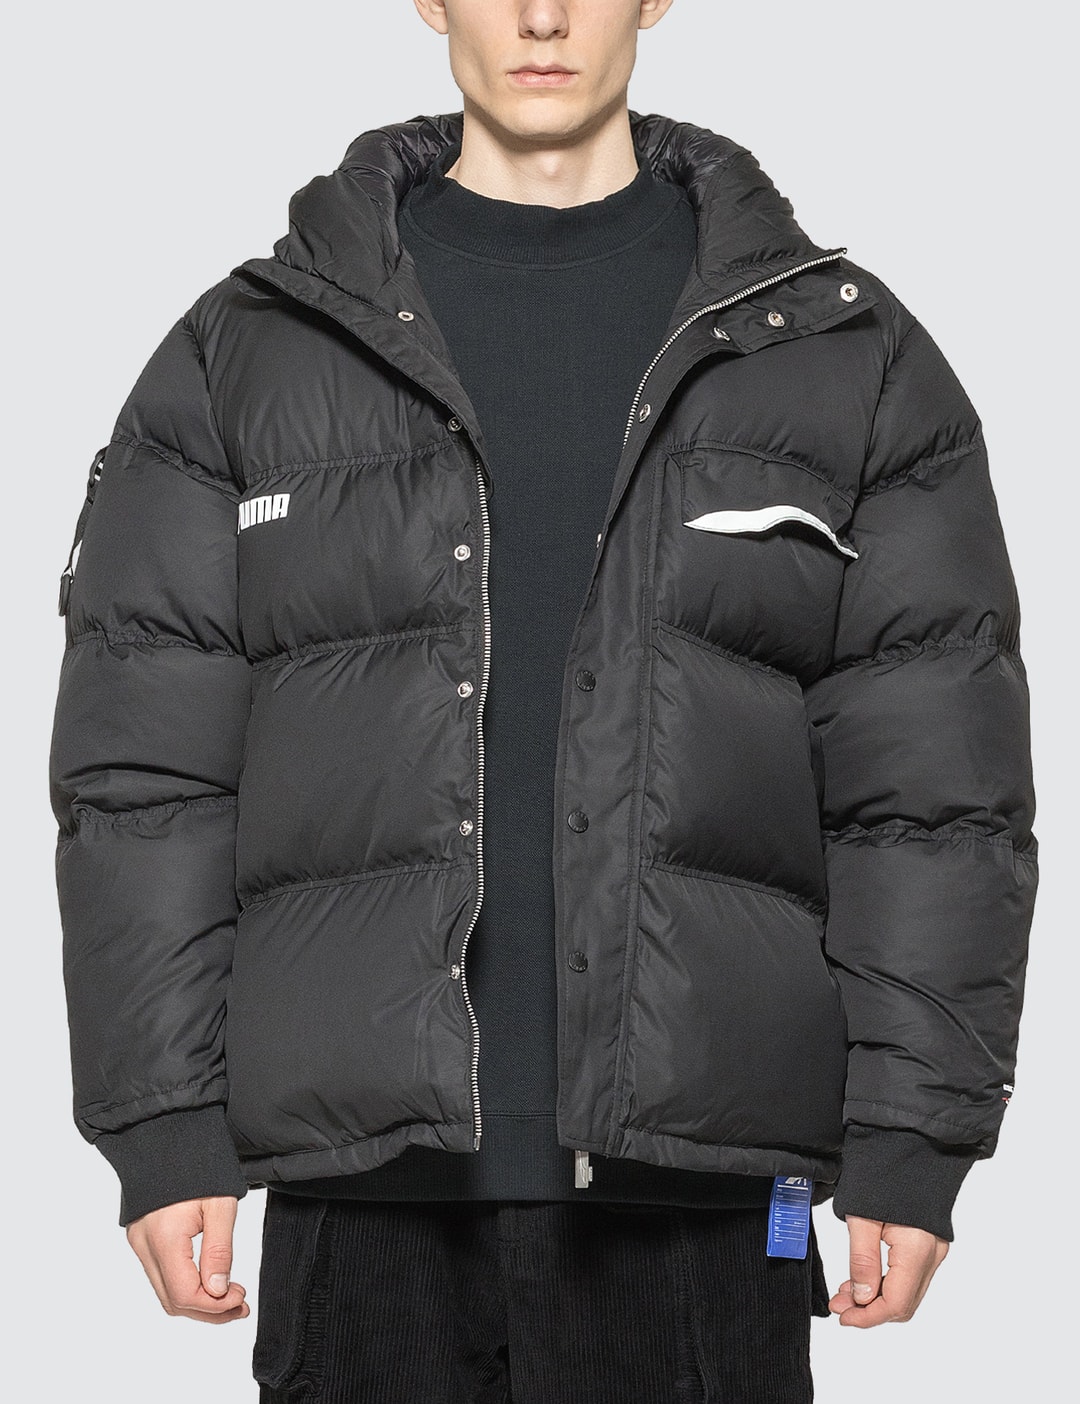 Puma - Ader Error X Puma Down Puffer Jacket | HBX - Globally Curated and Lifestyle by Hypebeast